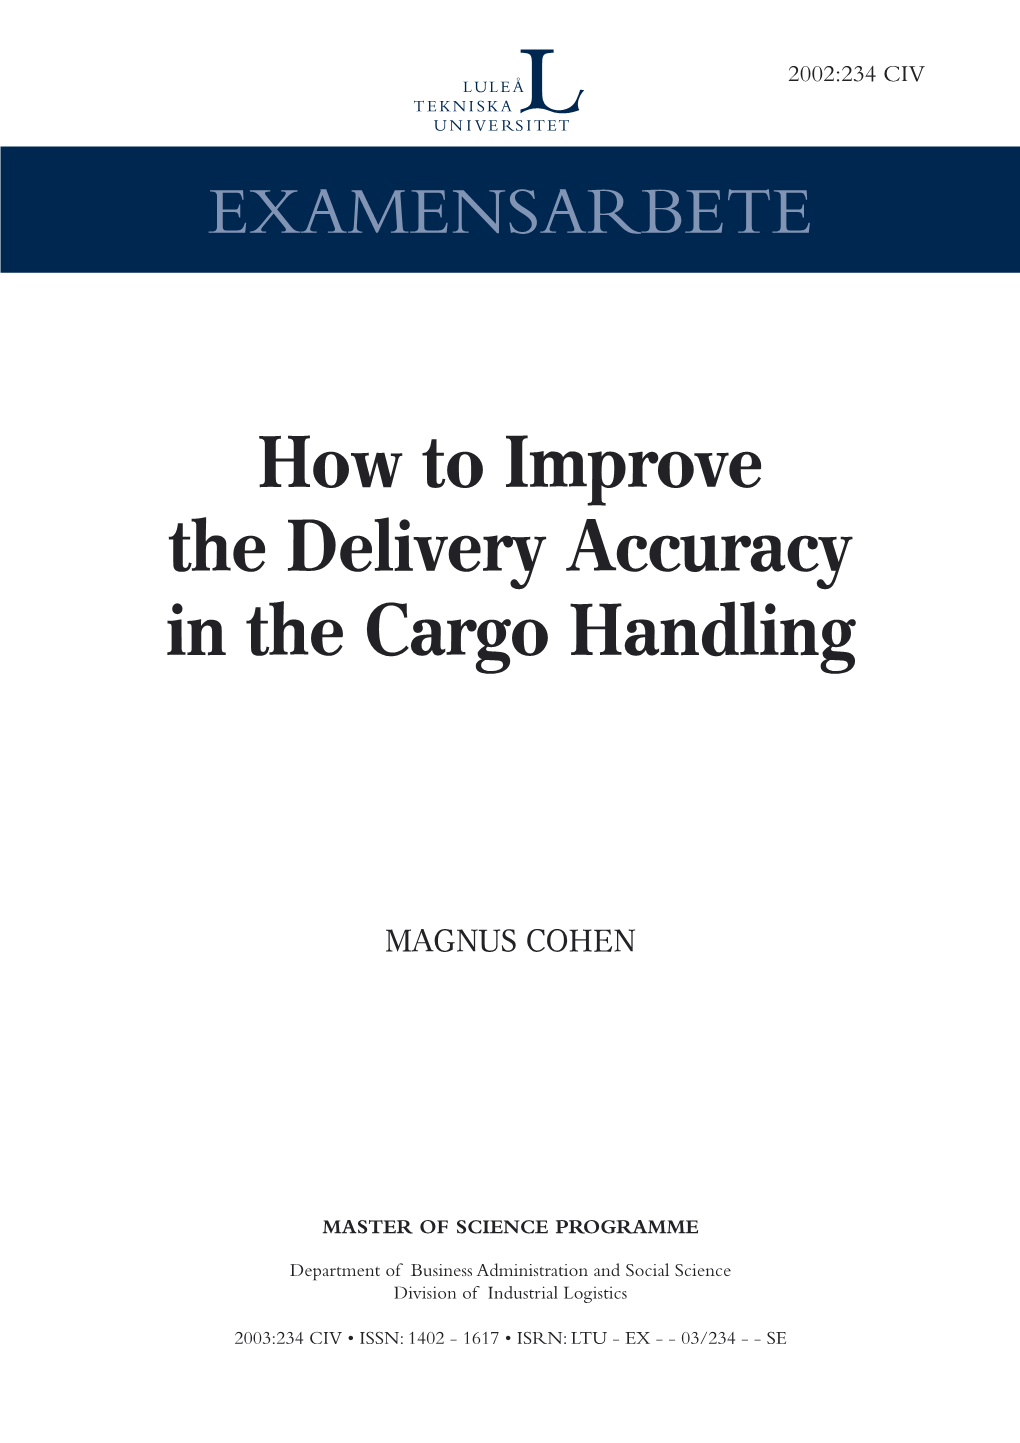 How to Improve the Delivery Accuracy in the Cargo Handling